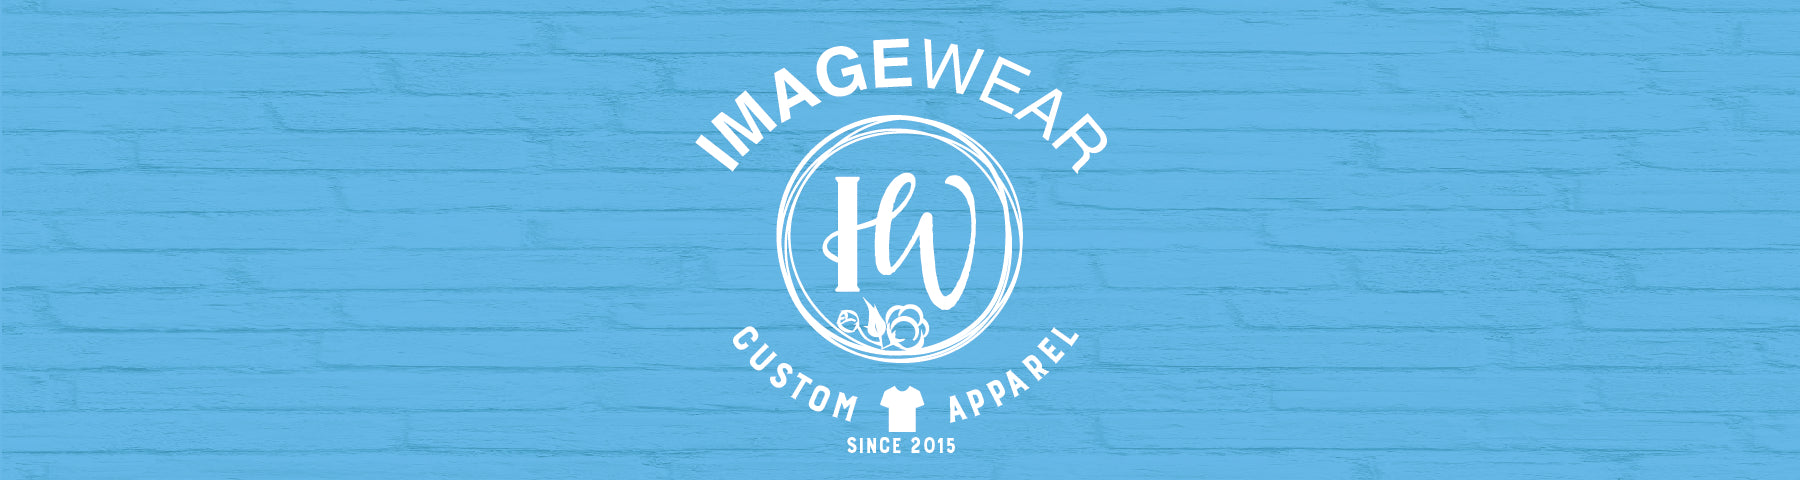 Image Wear Feature image 